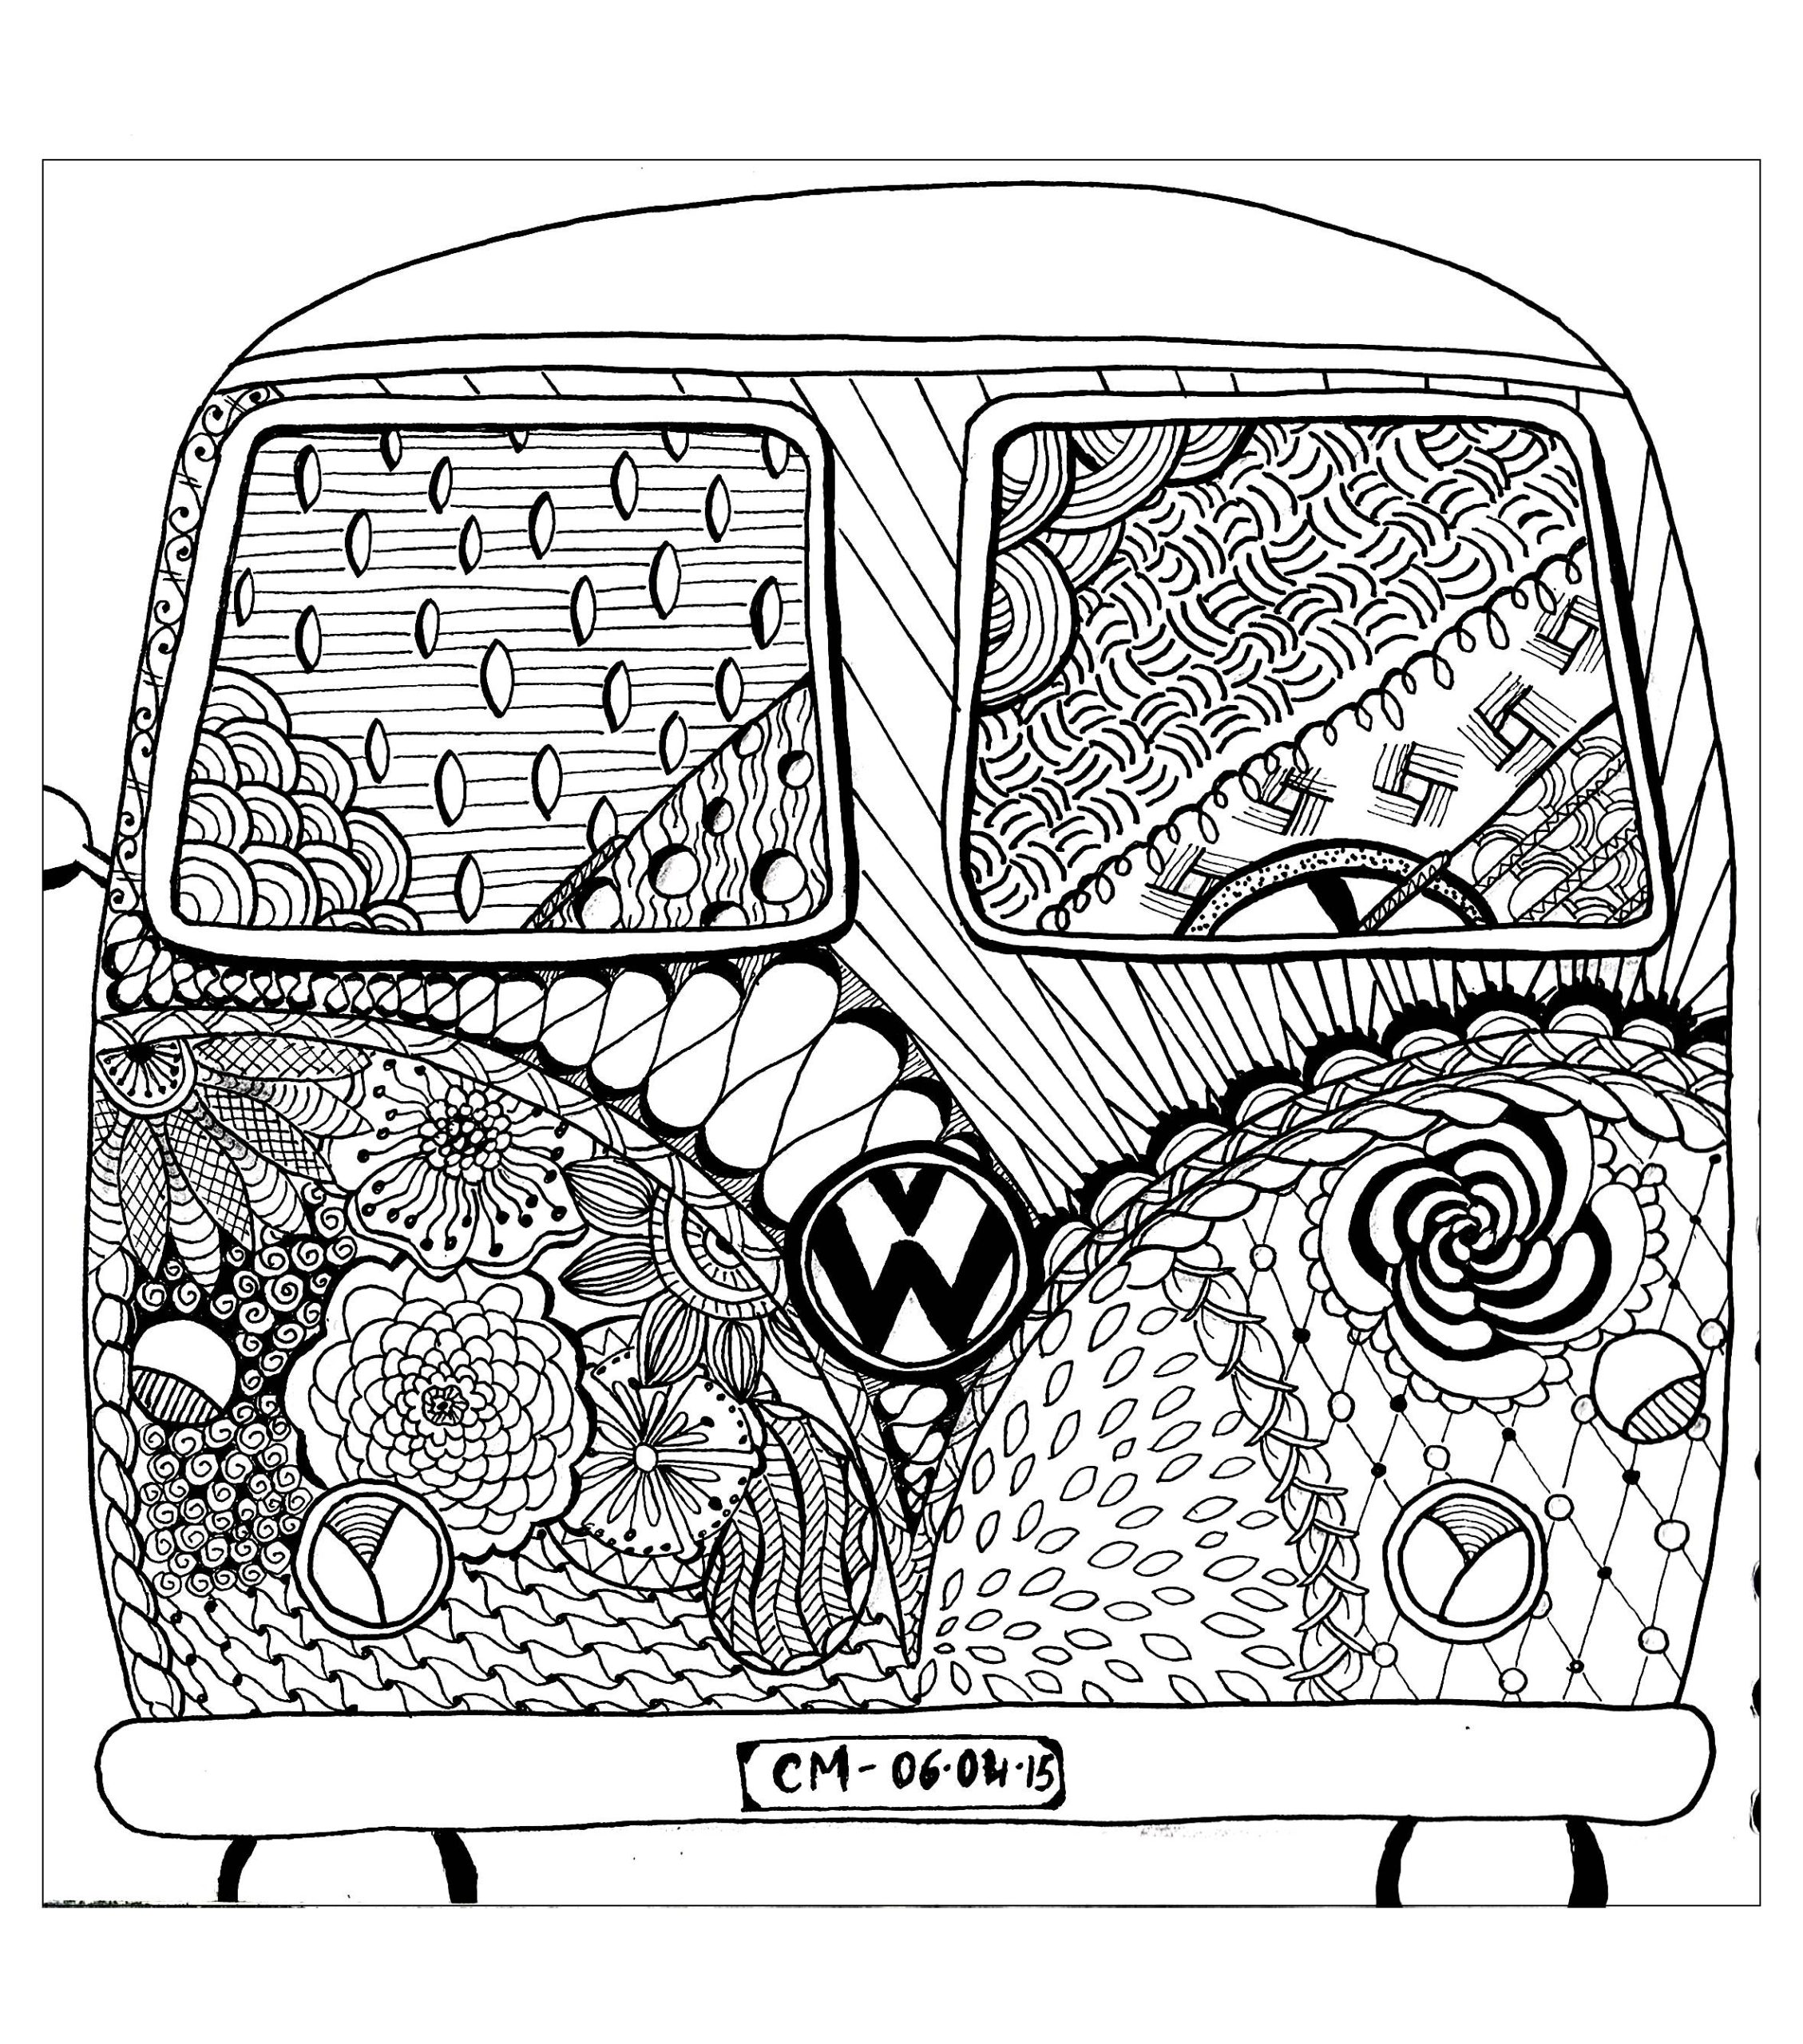 Coloring Book : Top Fabulous Coloring Ideas Zentangle By Cathym ...